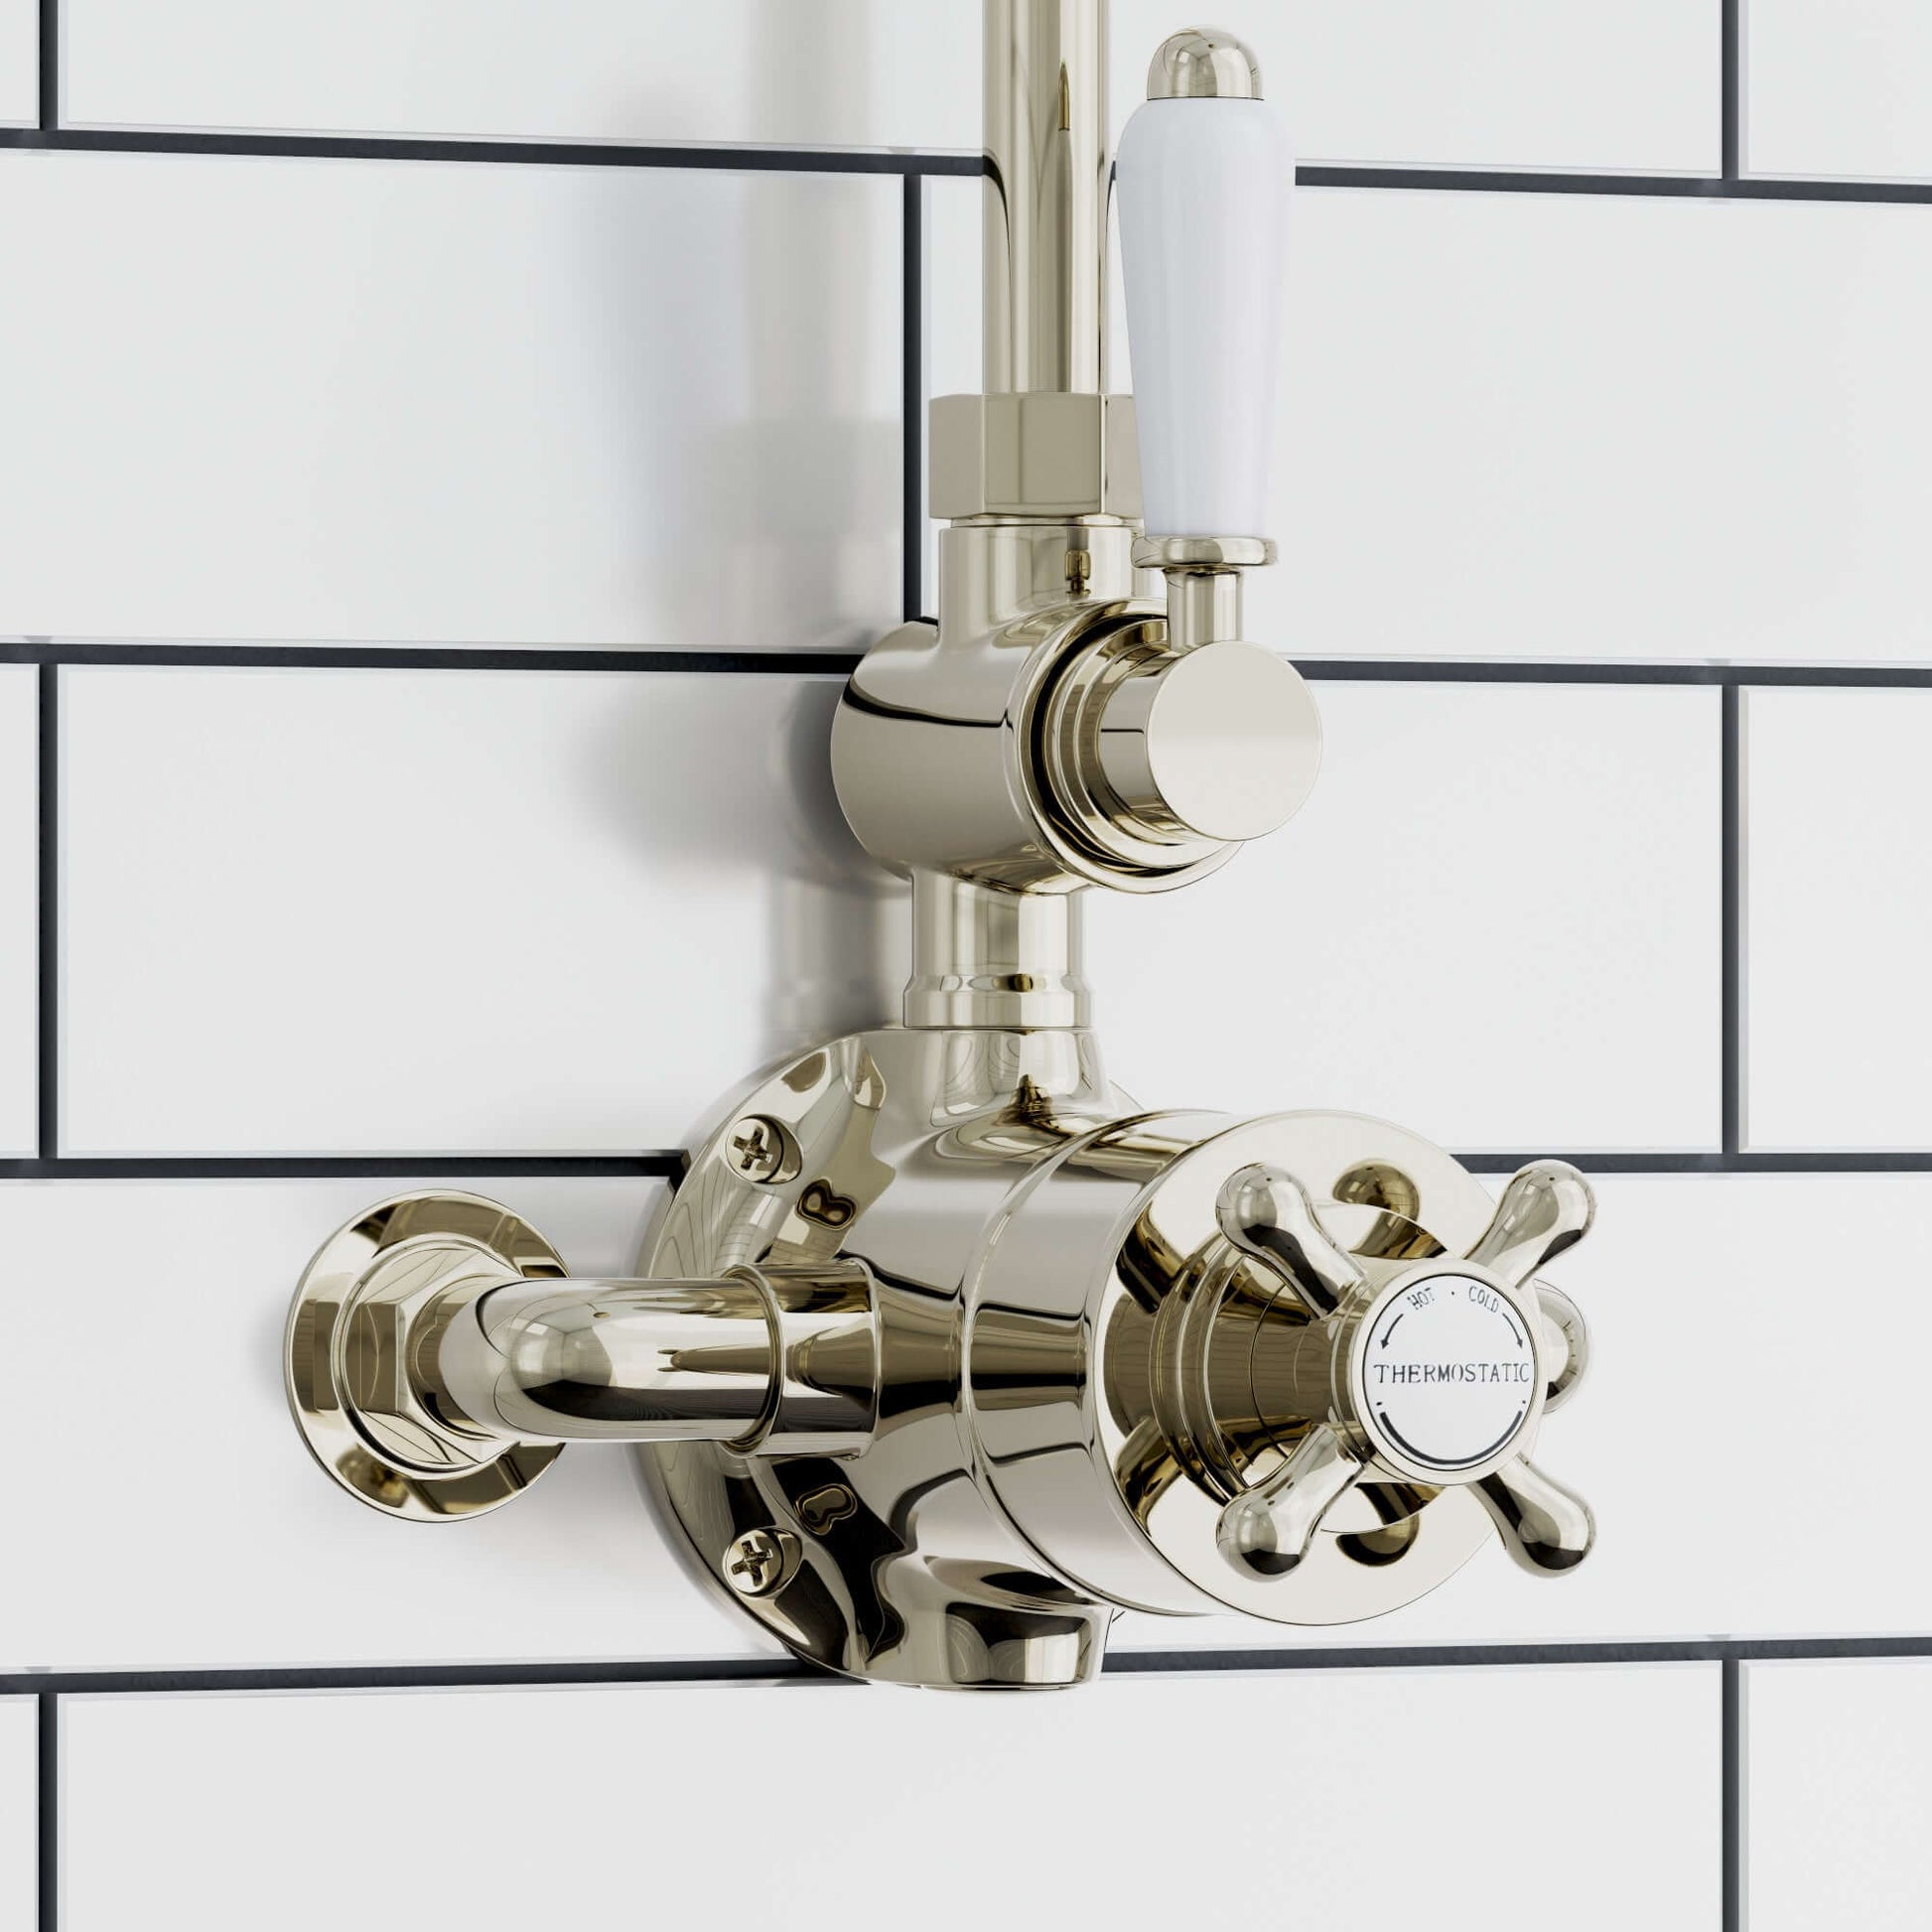 Downton Exposed Traditional Thermostatic Shower Set Single Outlet Incl. Twin Shower Valve, Rigid Riser Rail, 200mm Shower Head & Caddy - English Gold And White - Showers